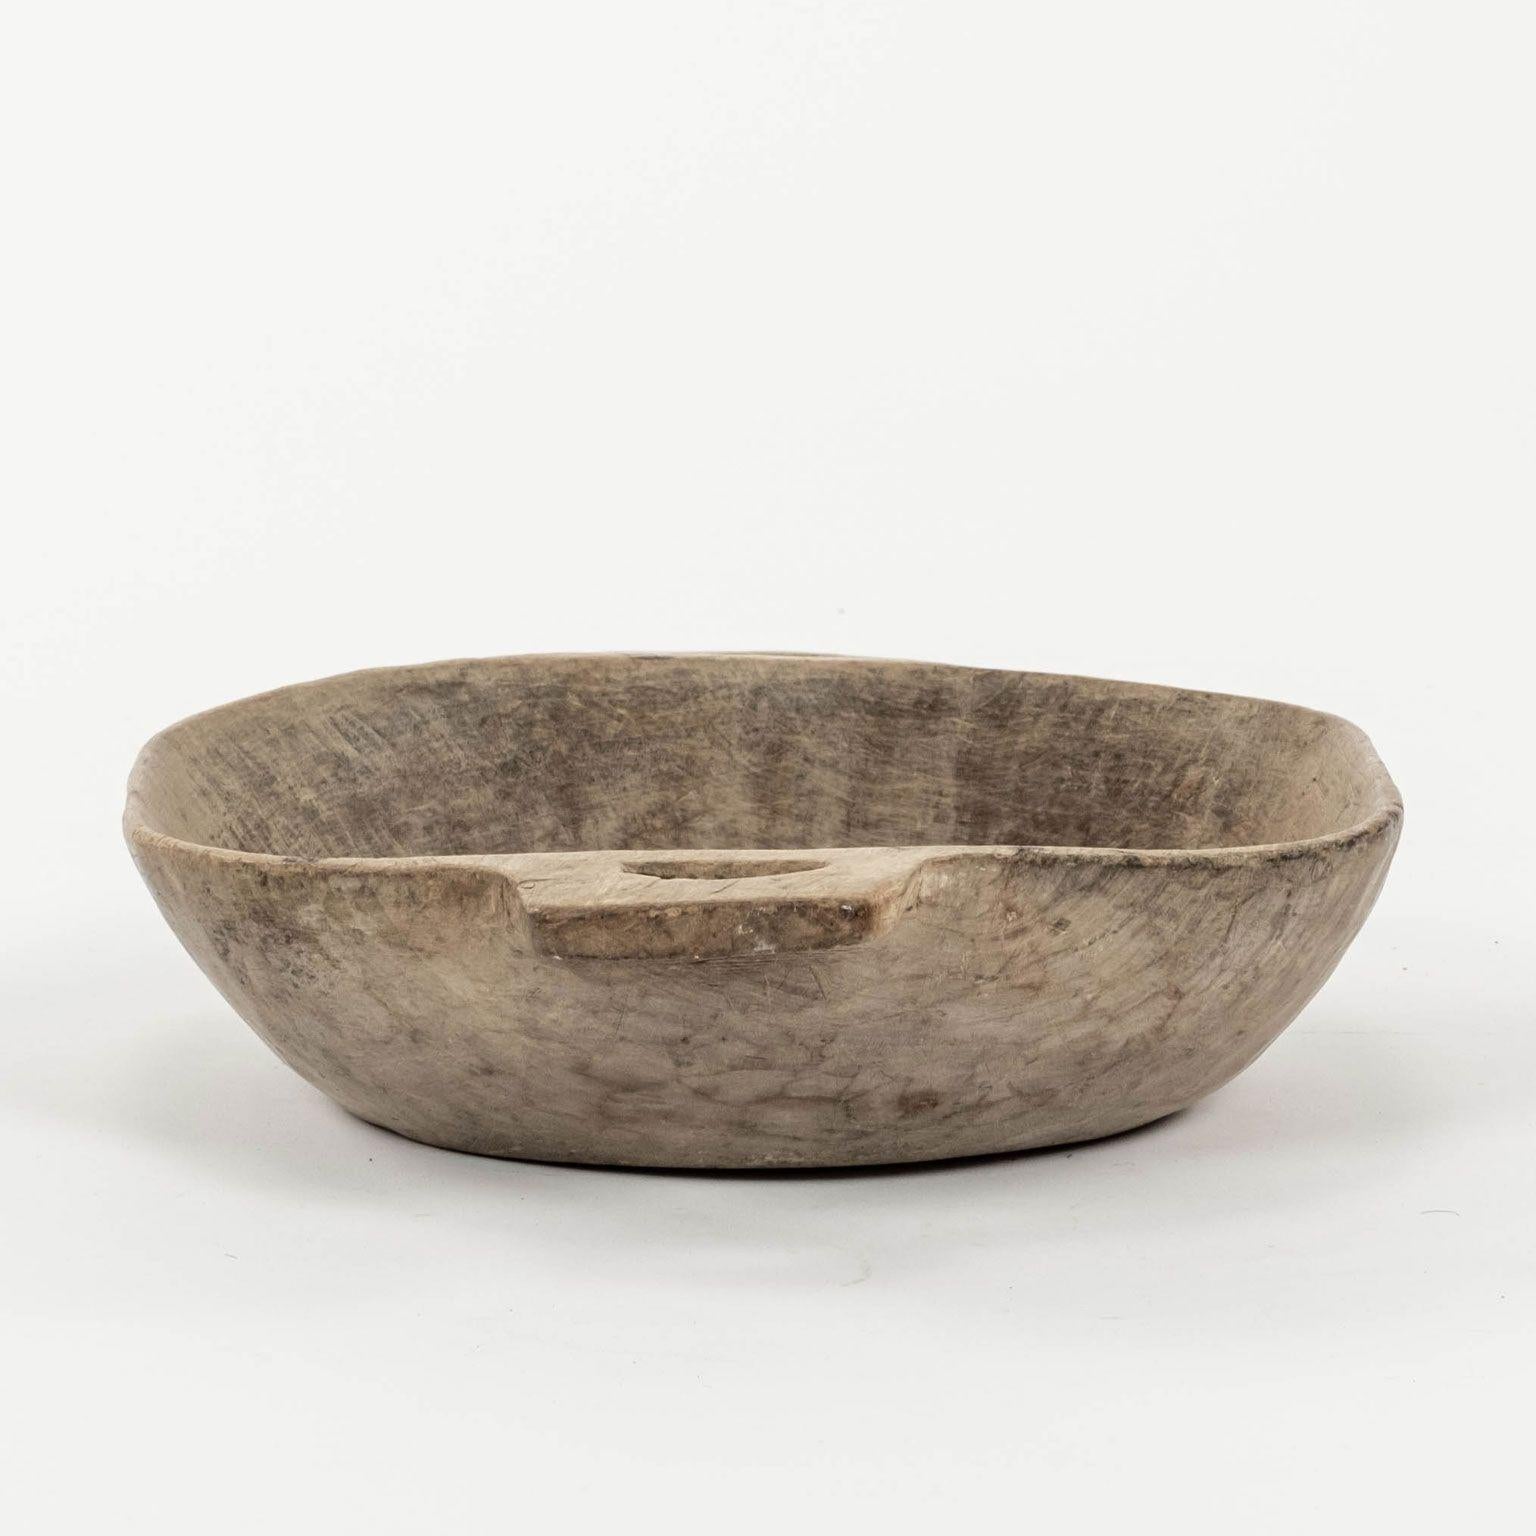 Primitive Swedish Lapland bowl with handles. Dry-rubbed mid-brown finish. Hand-carved in sycamore. Dates to early 19th century or late 18th century.

Note: Due to regional changes in humidity and climate during shipping, antique wood may shrink